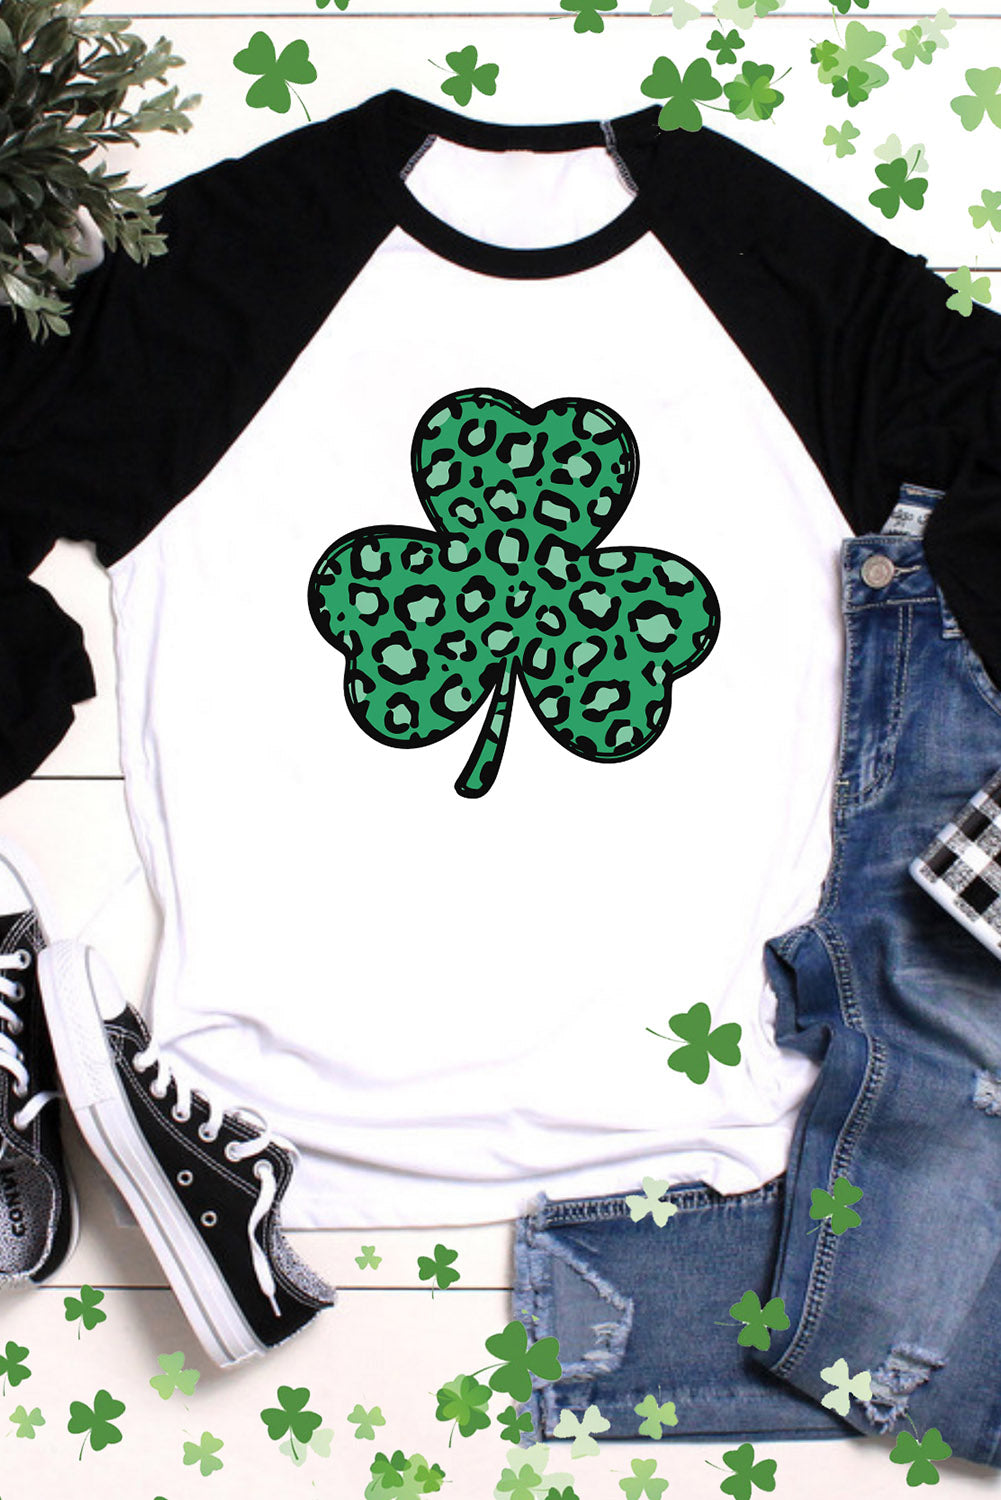 Leopard Spotted Clover St Patric T Shirt